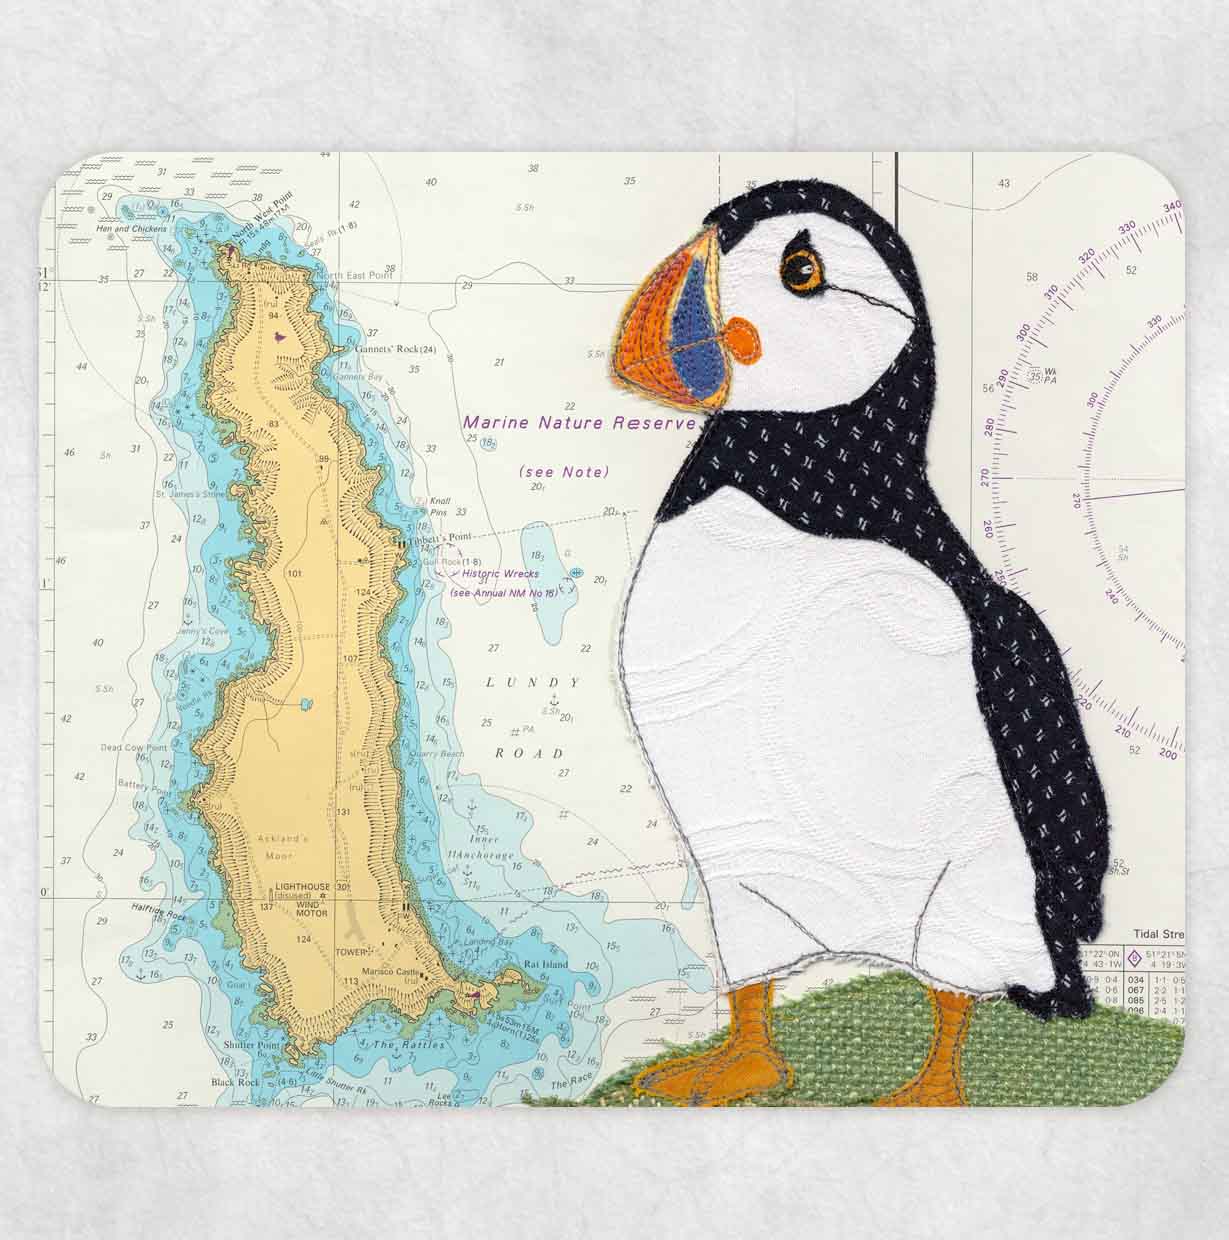 Placemat printed with a textile art design of a puffin on an old sea chart